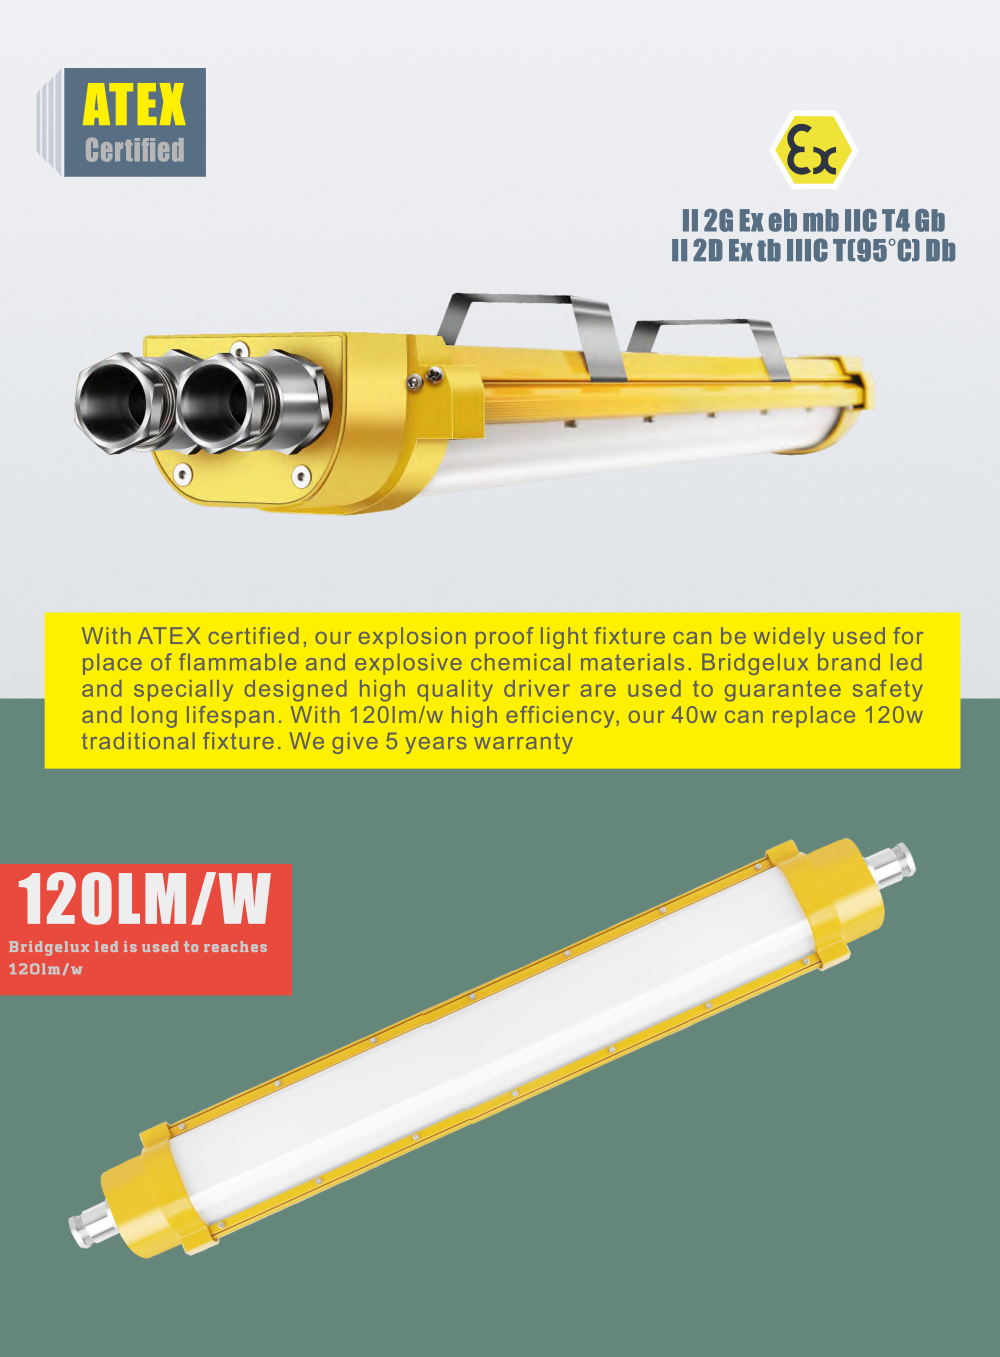 LED Explosion Proof Linear Lights | Eneltec Group